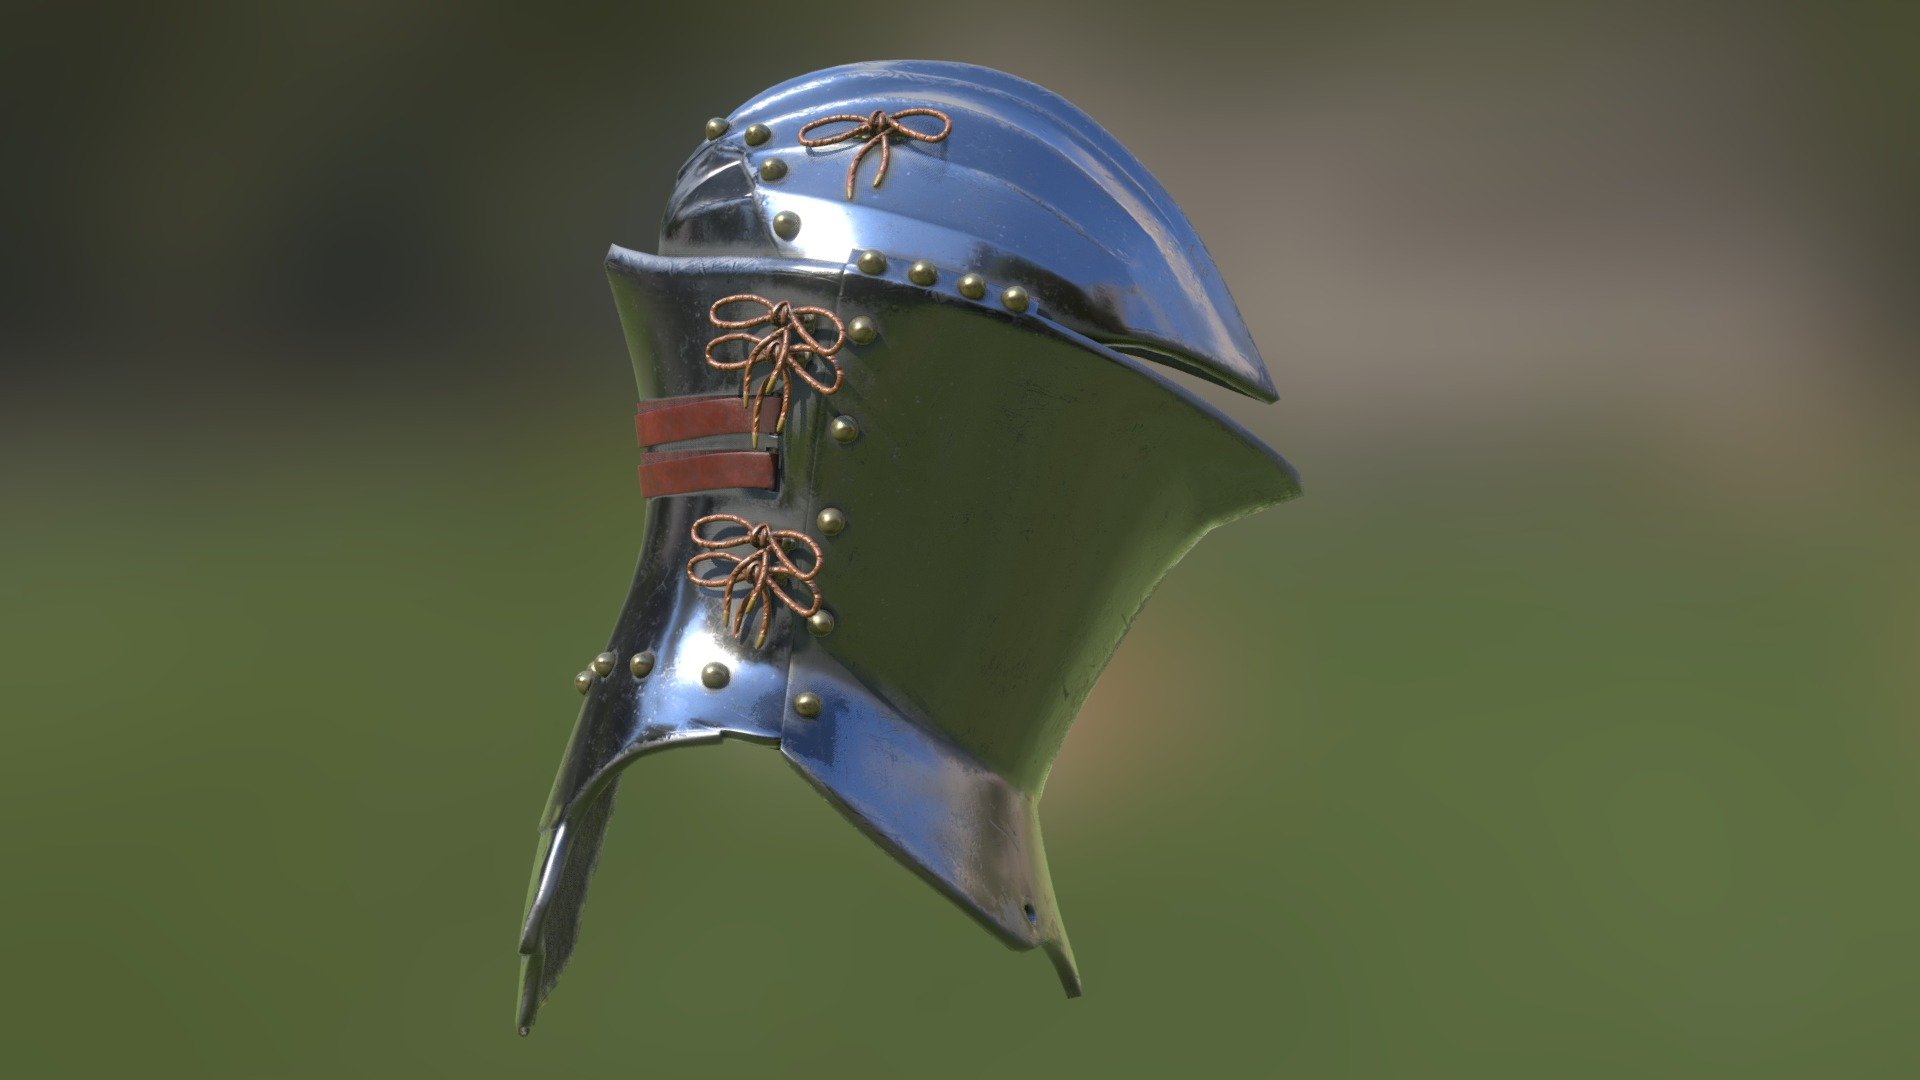 Jousting medieval helm (stechhelm) with PBR textures. 
Low-poly model with detailed normal map, ideal for real-time applications.

Includes 4096x4096 PBR textures 3d model